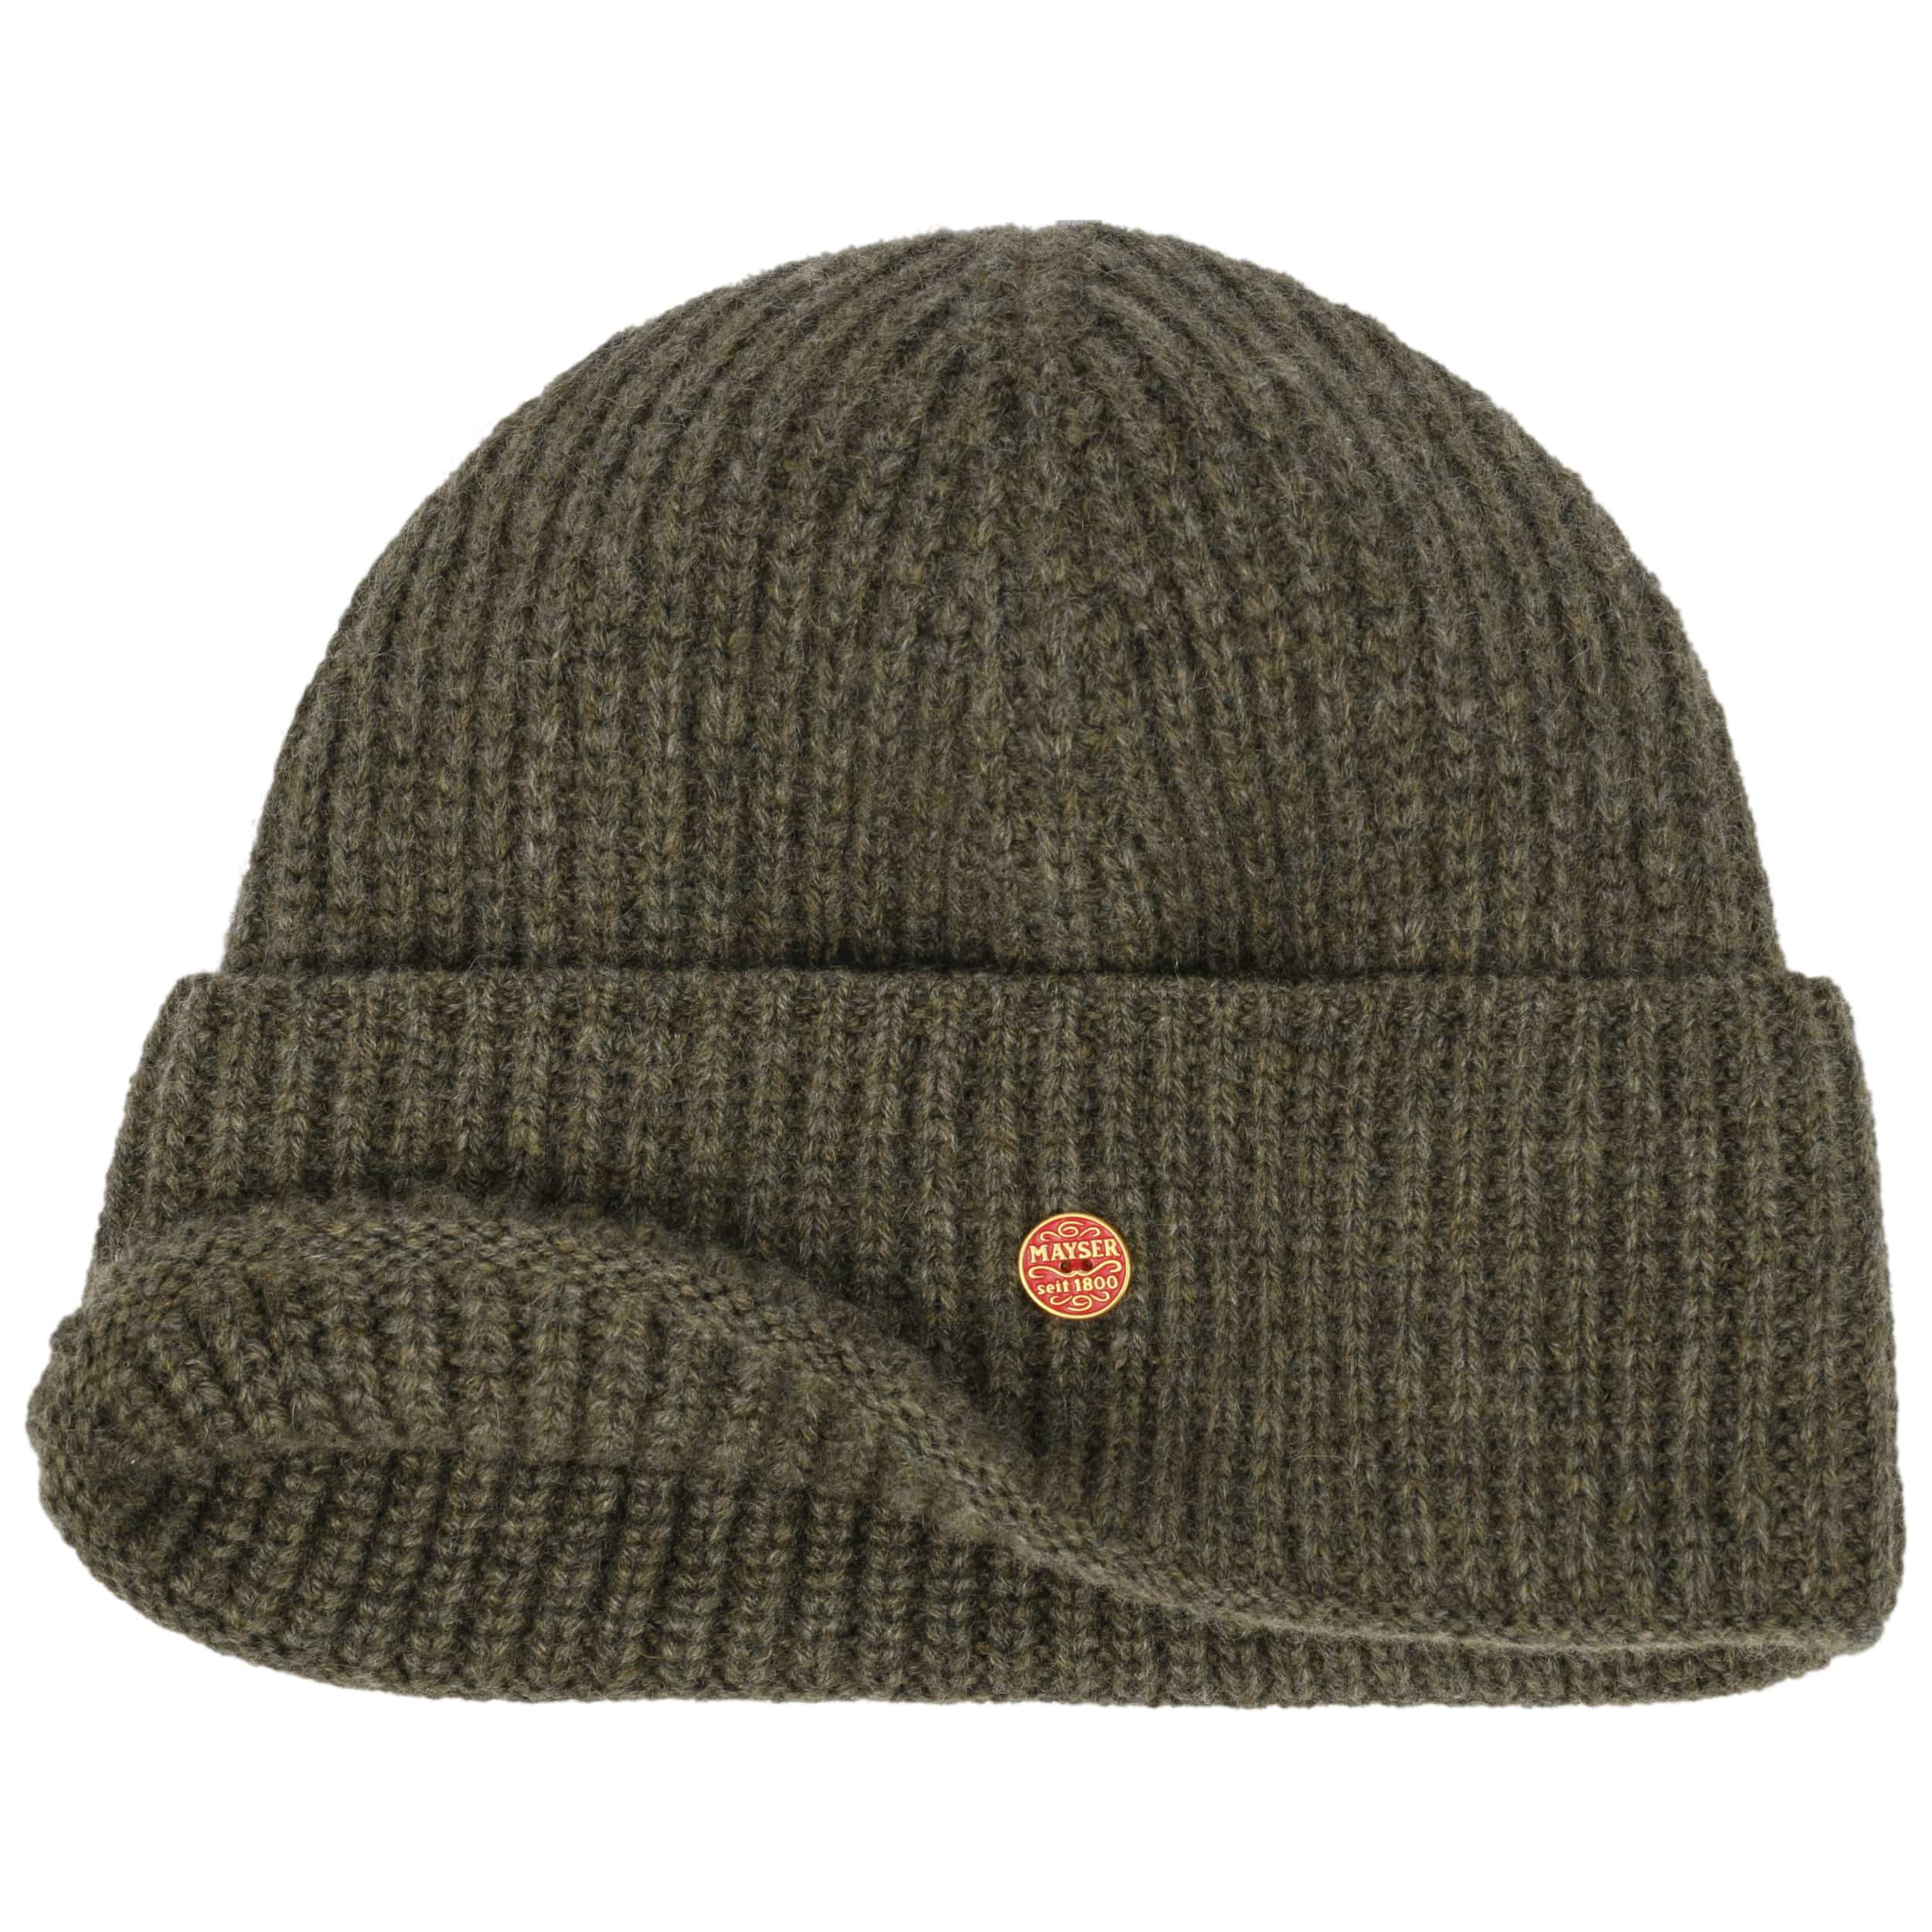 Surth Cashmere Knit Hat STETSON EUROPE, Fast Shipping